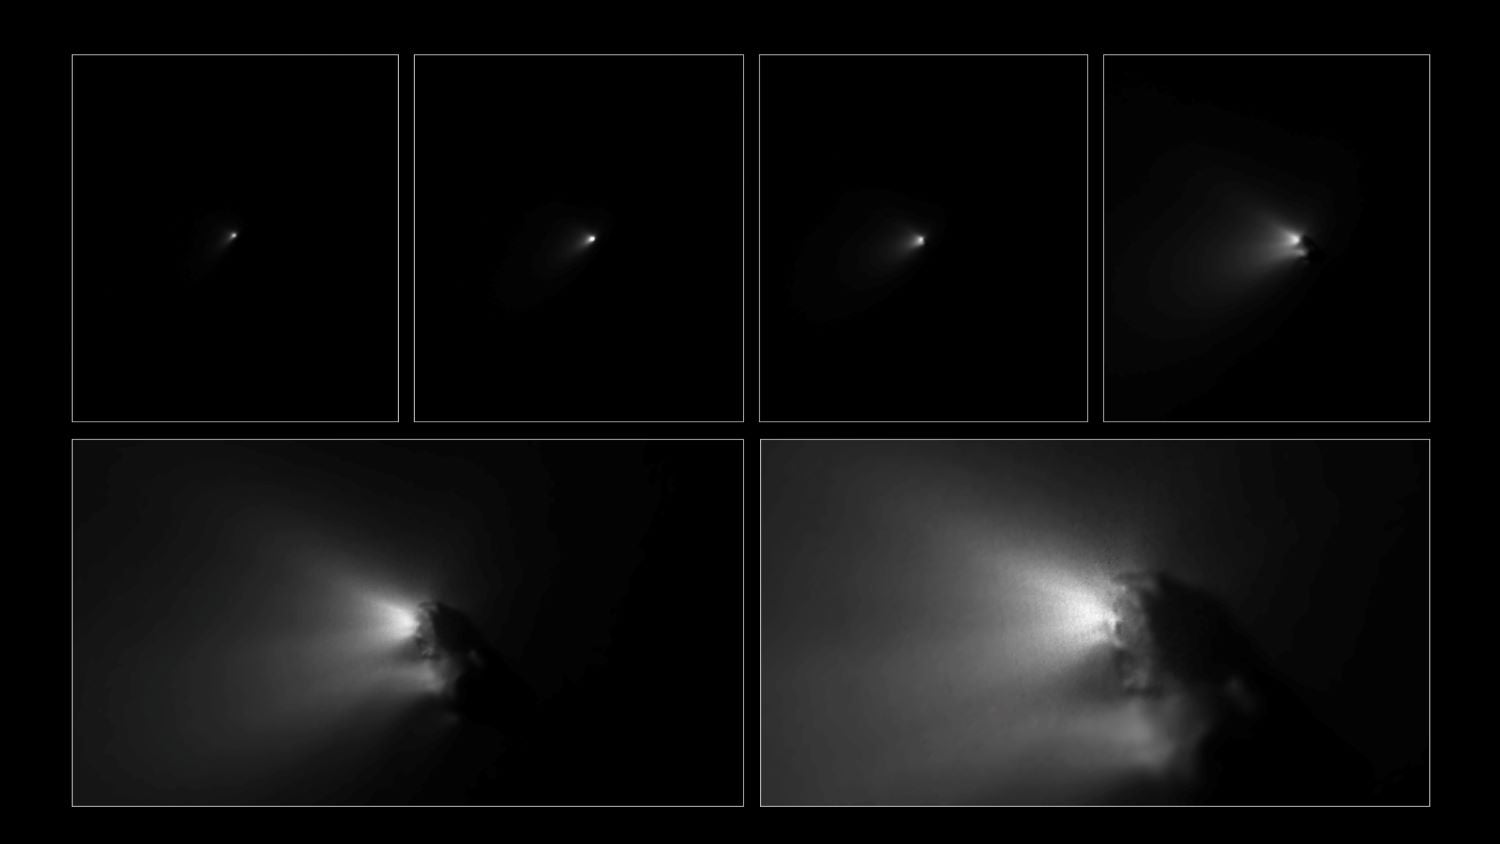 A montage from the Giotto spacecraft as it approaches Halley's Comet.